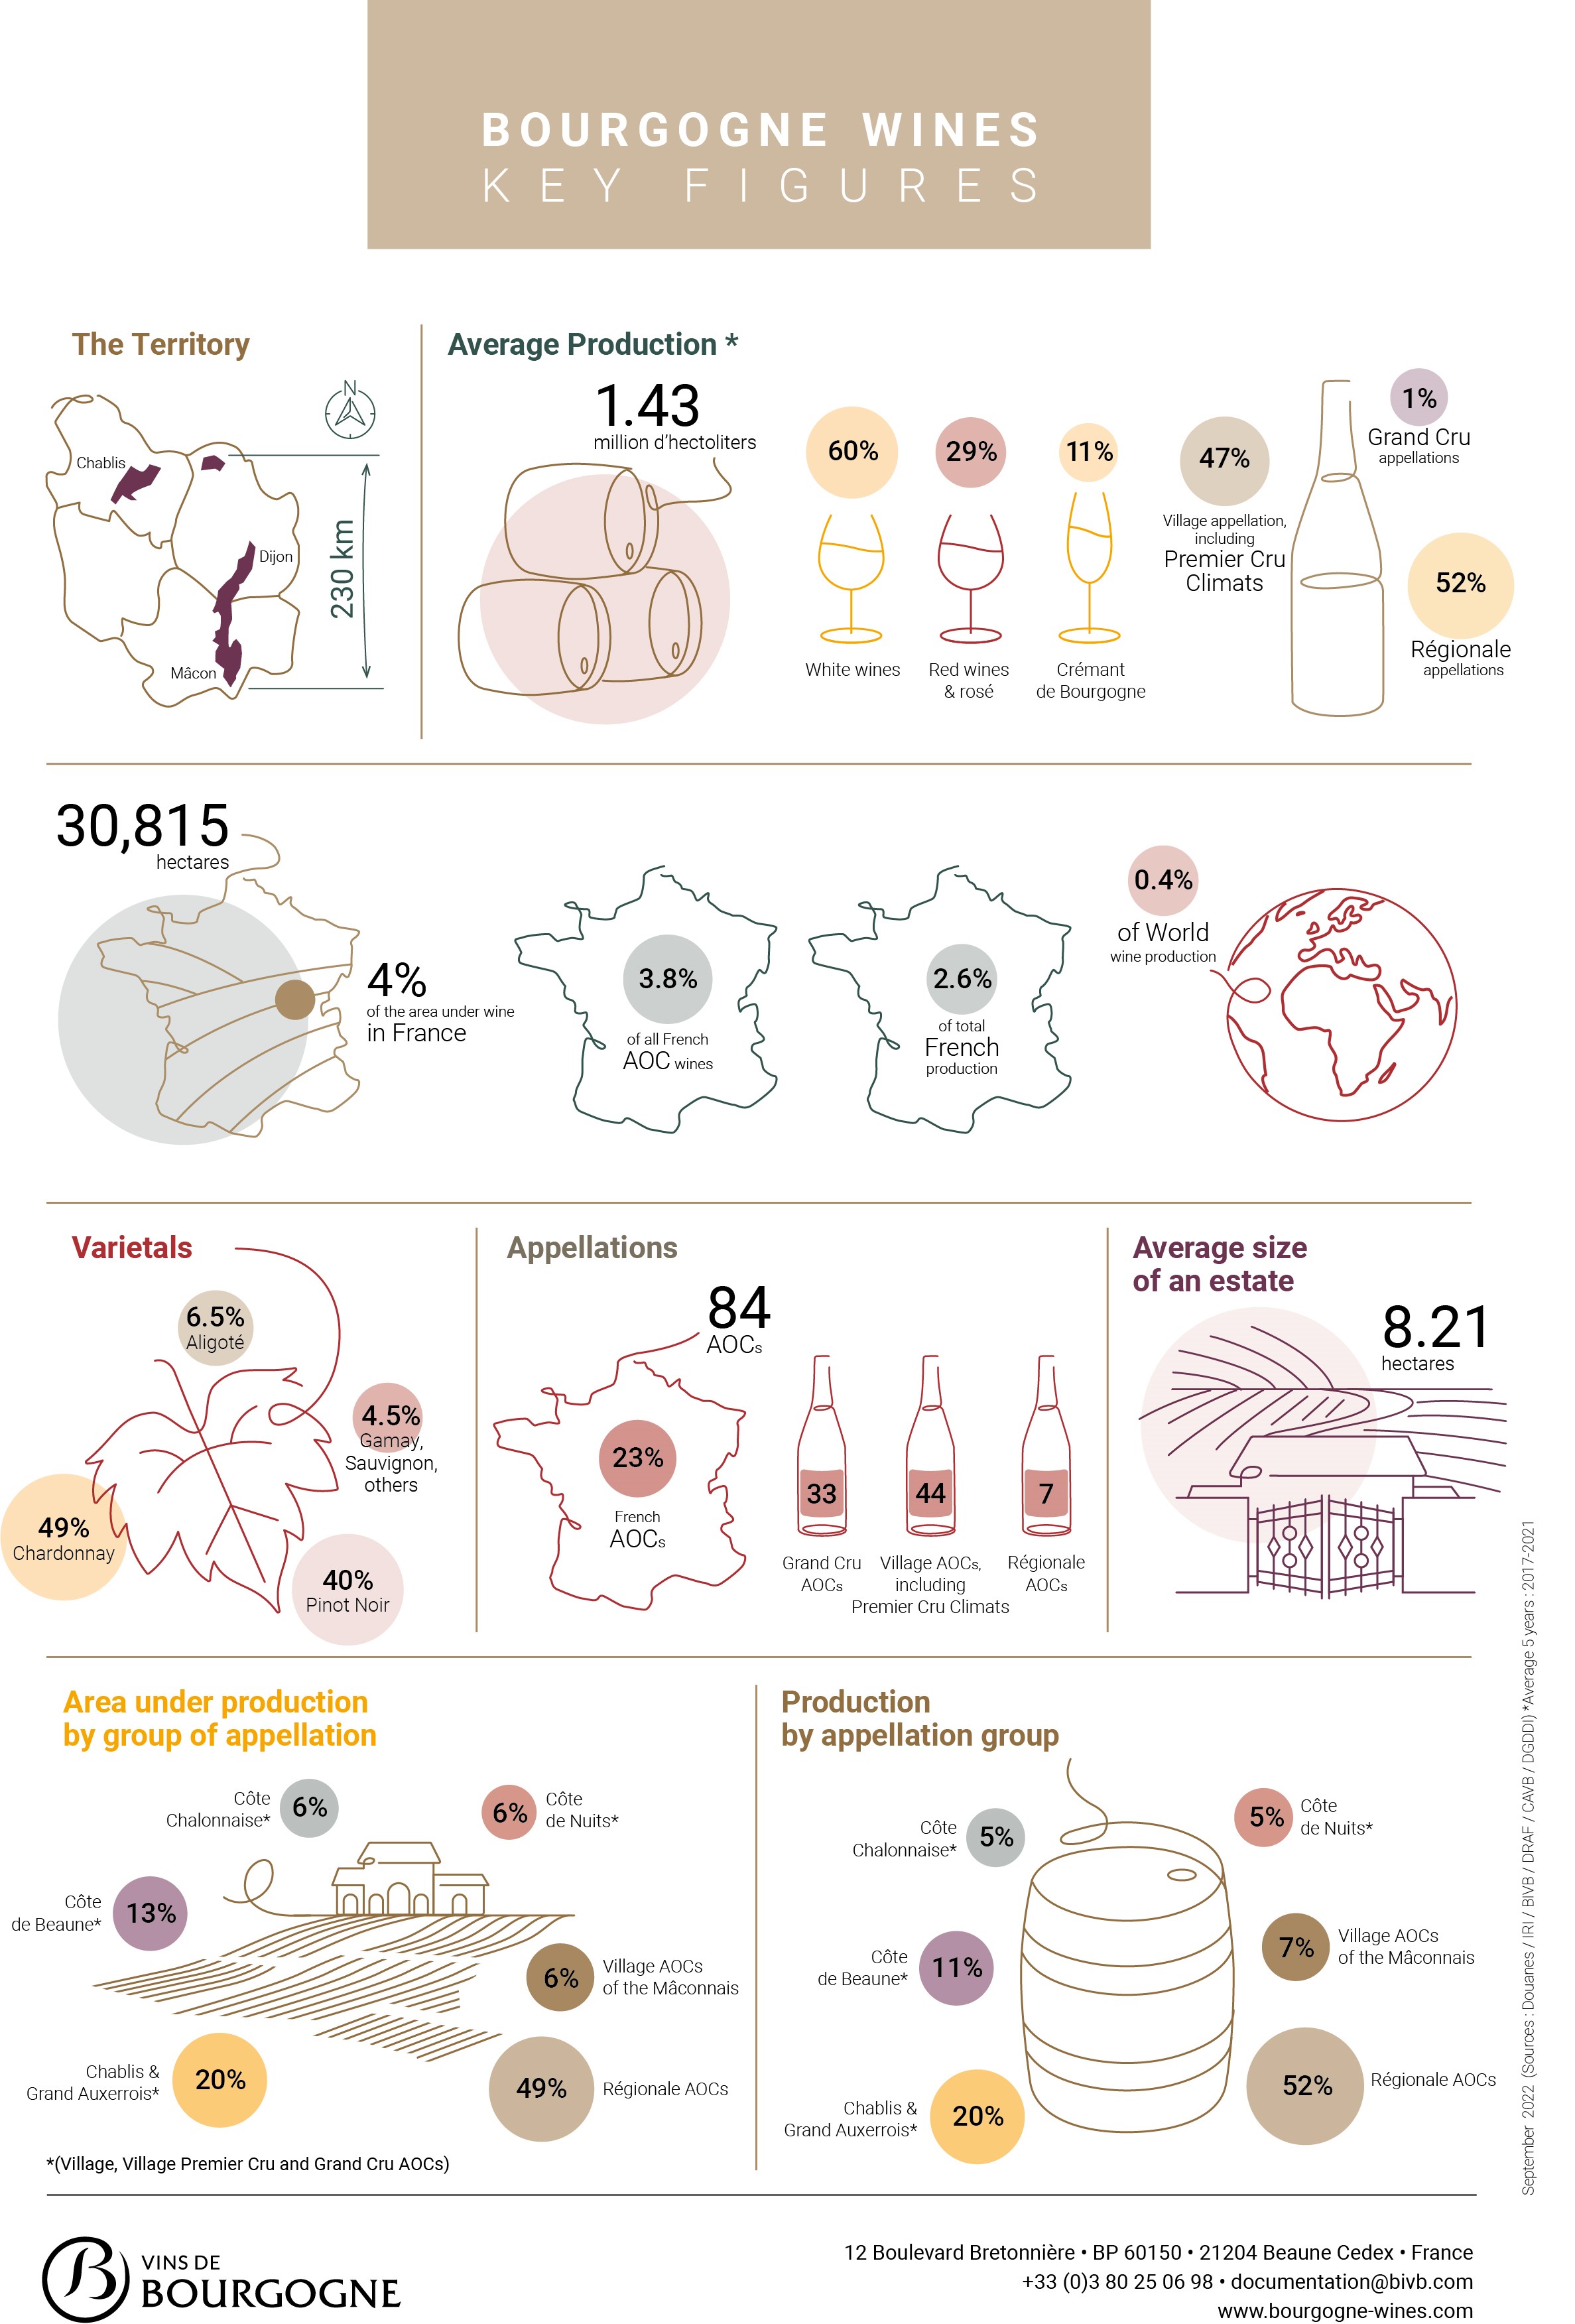 Key figures for the Bourgogne winegrowing region